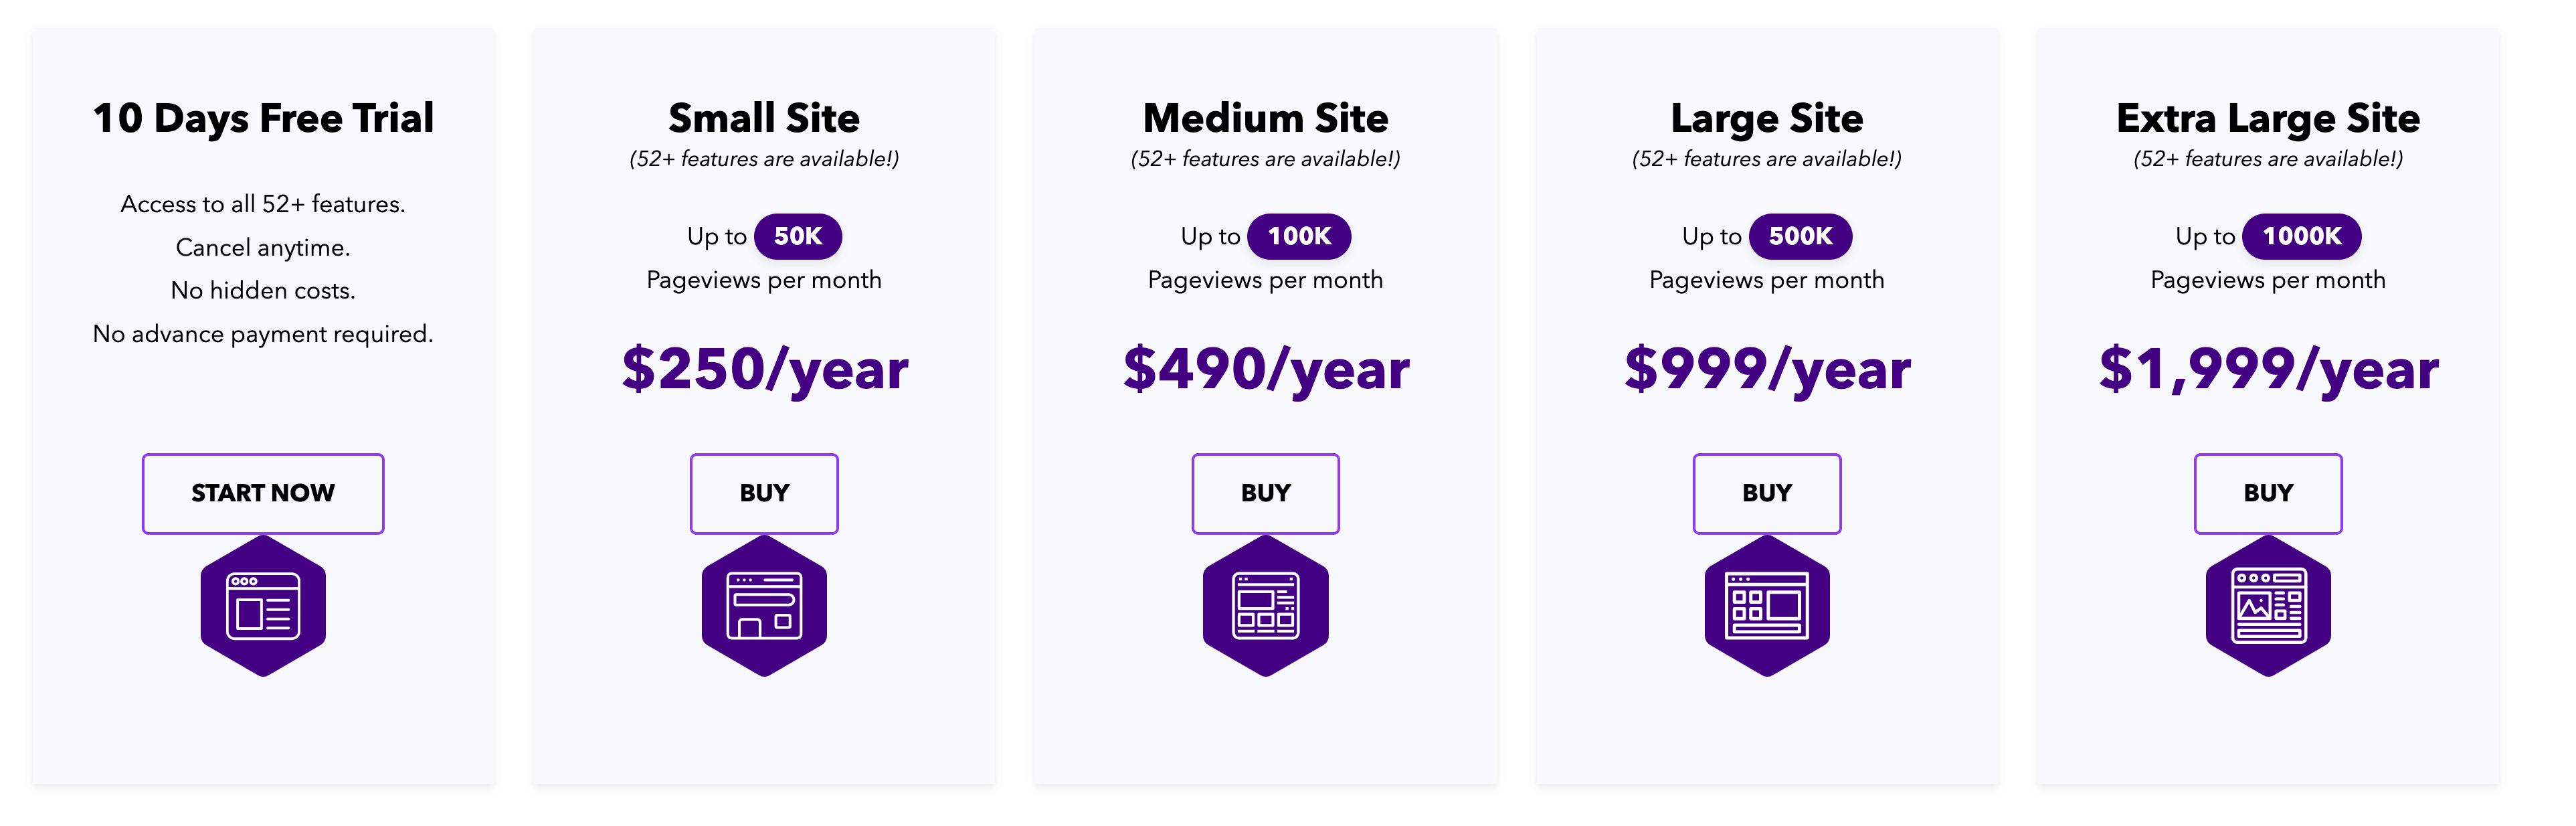 All in One Accessibility Pricing Plans